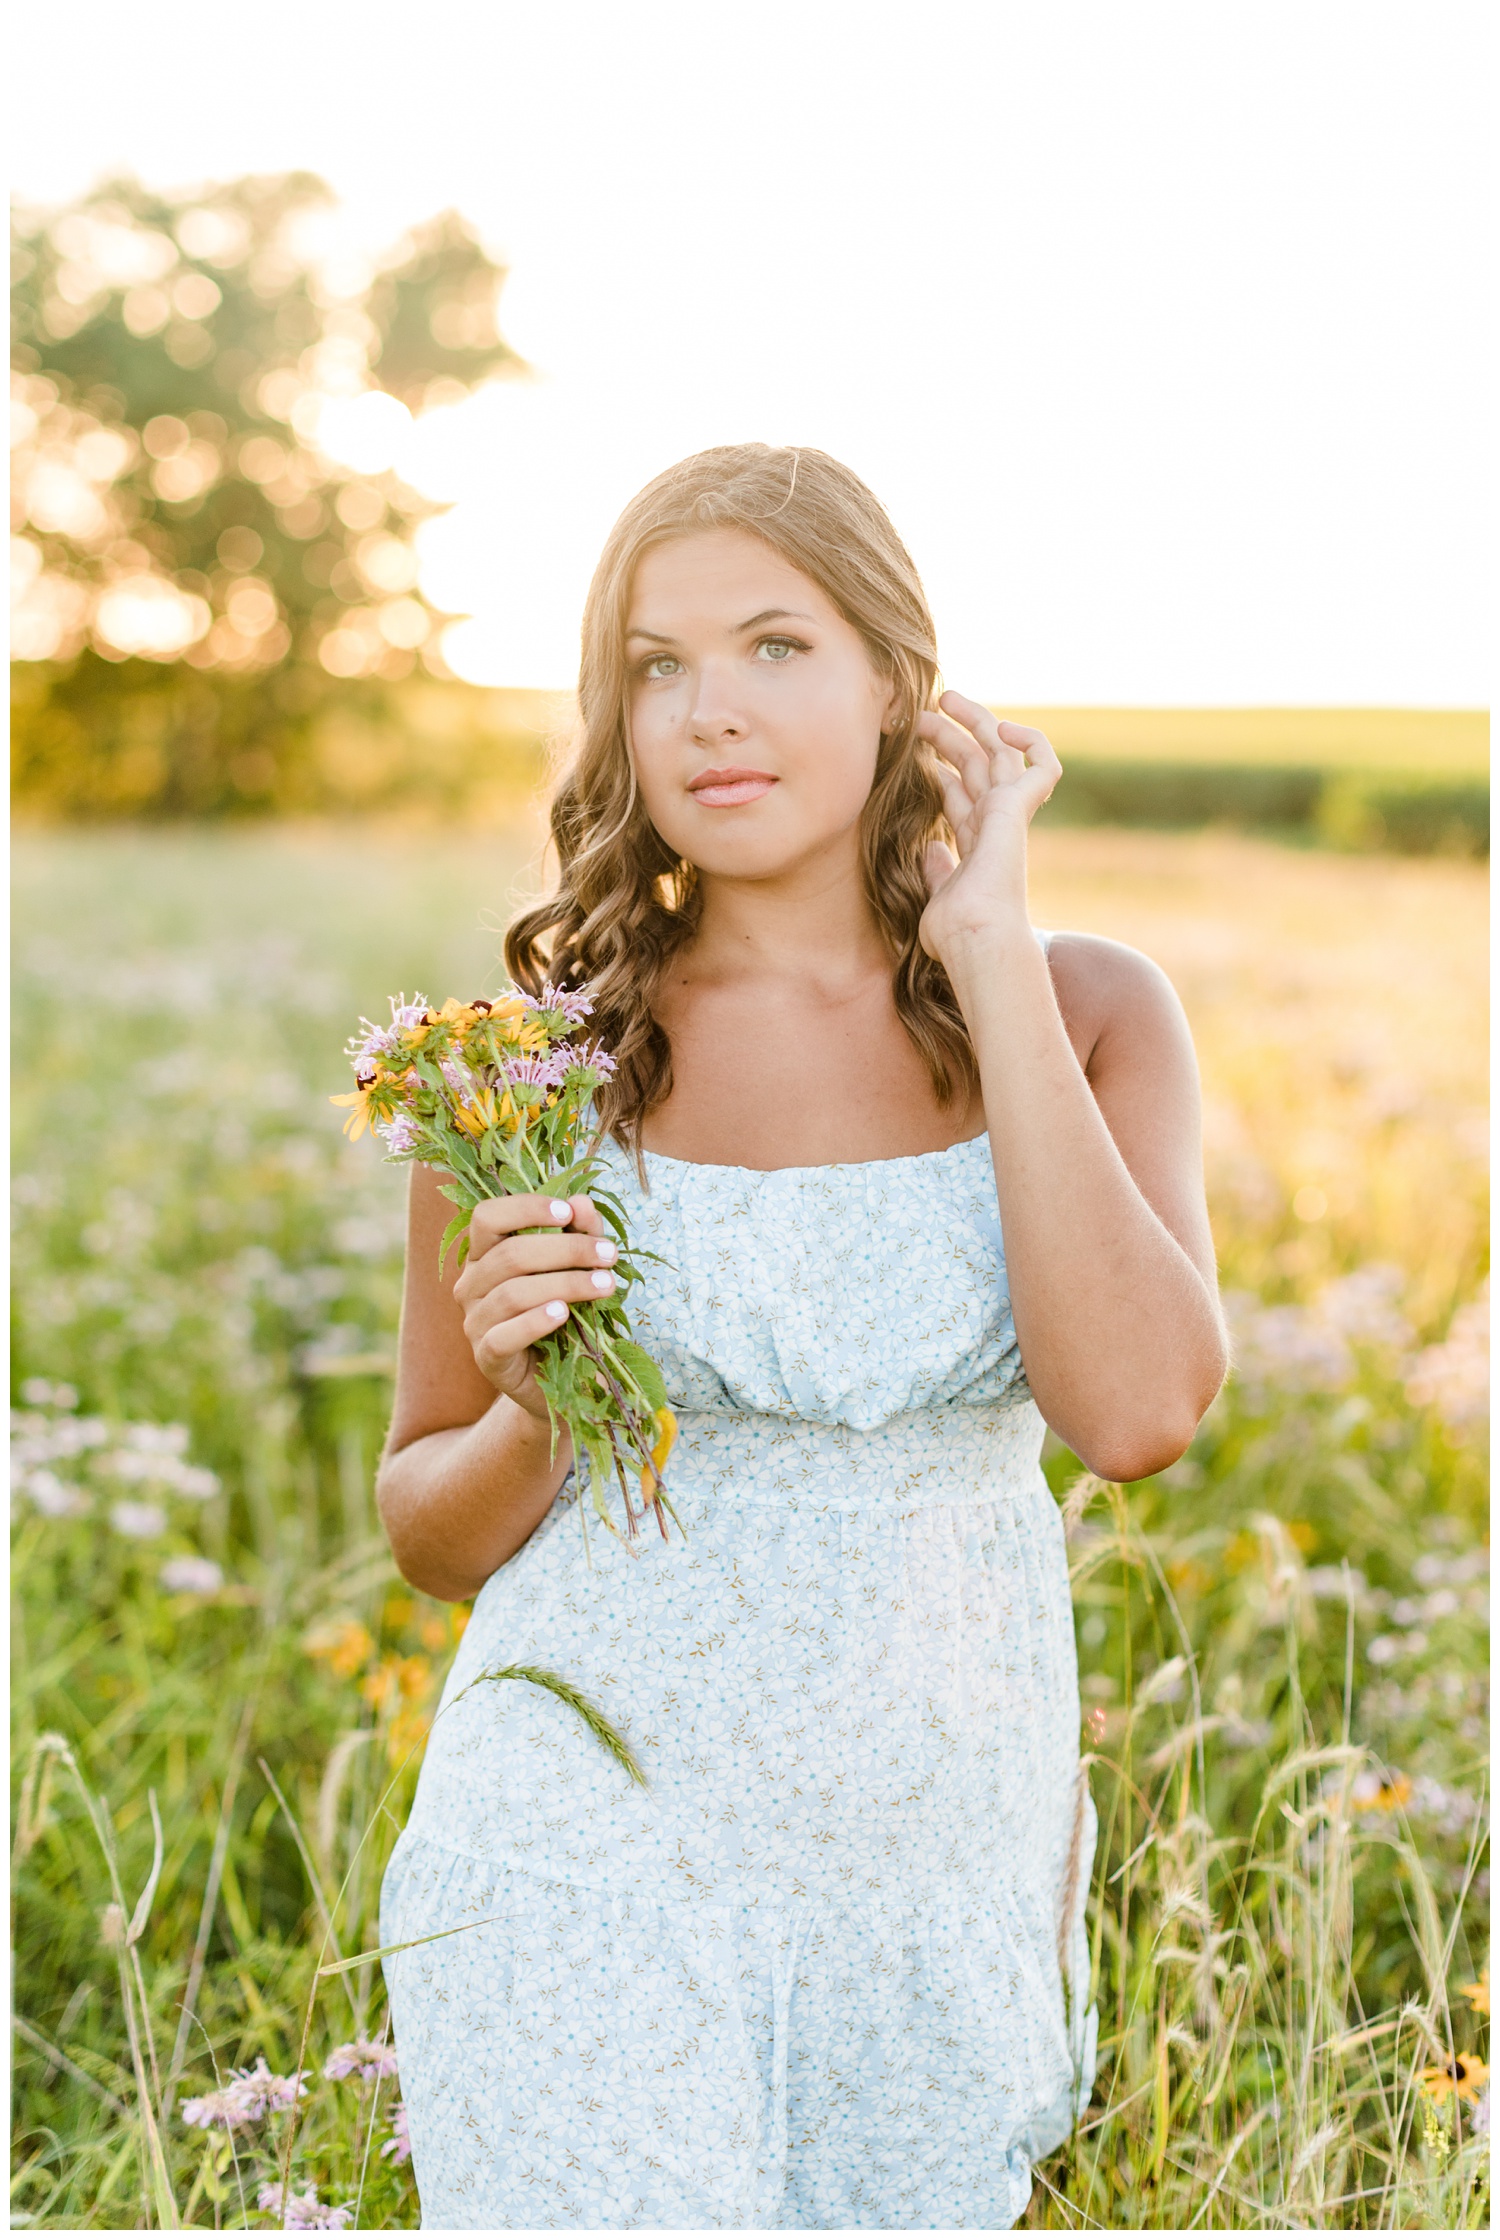 Analia walks gracefully as she tucks her hair behind her ear in the middle of a wildflower field in Iowa | CB Studio